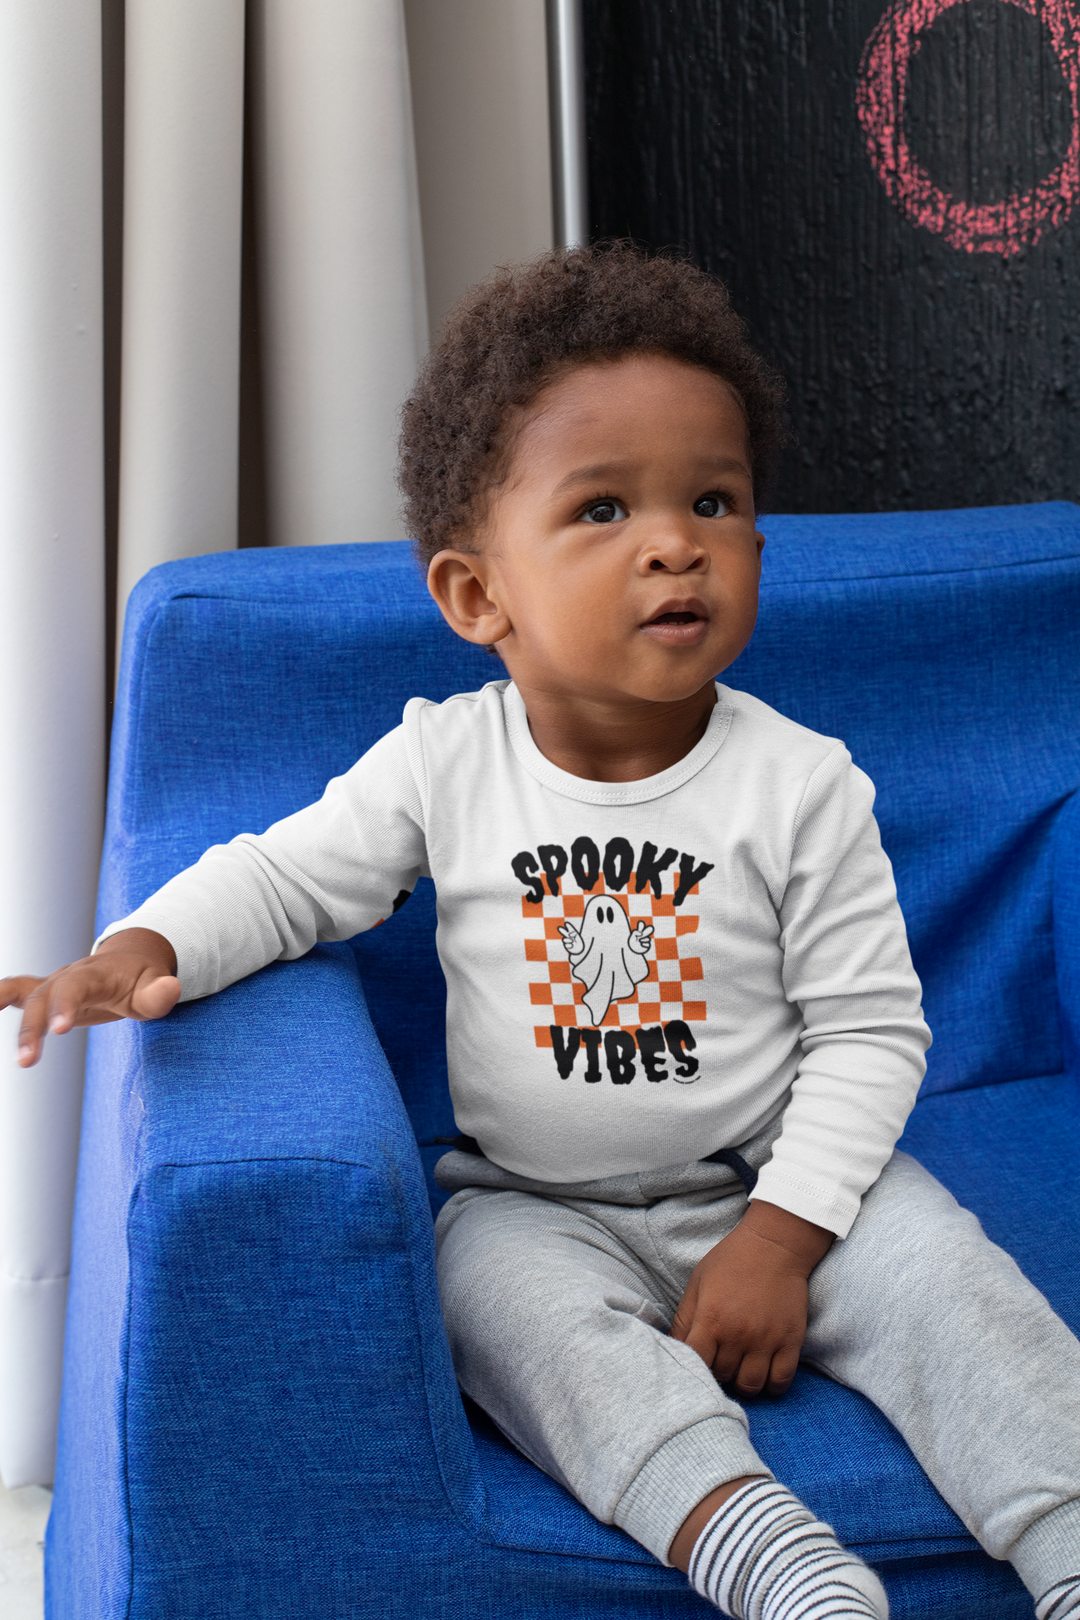 A spooky vibes long-sleeved onesie for infants, featuring a ghost design on a blue chair. Made of soft, durable fabric with plastic snaps for easy changing. Ideal for baby's comfort and style.